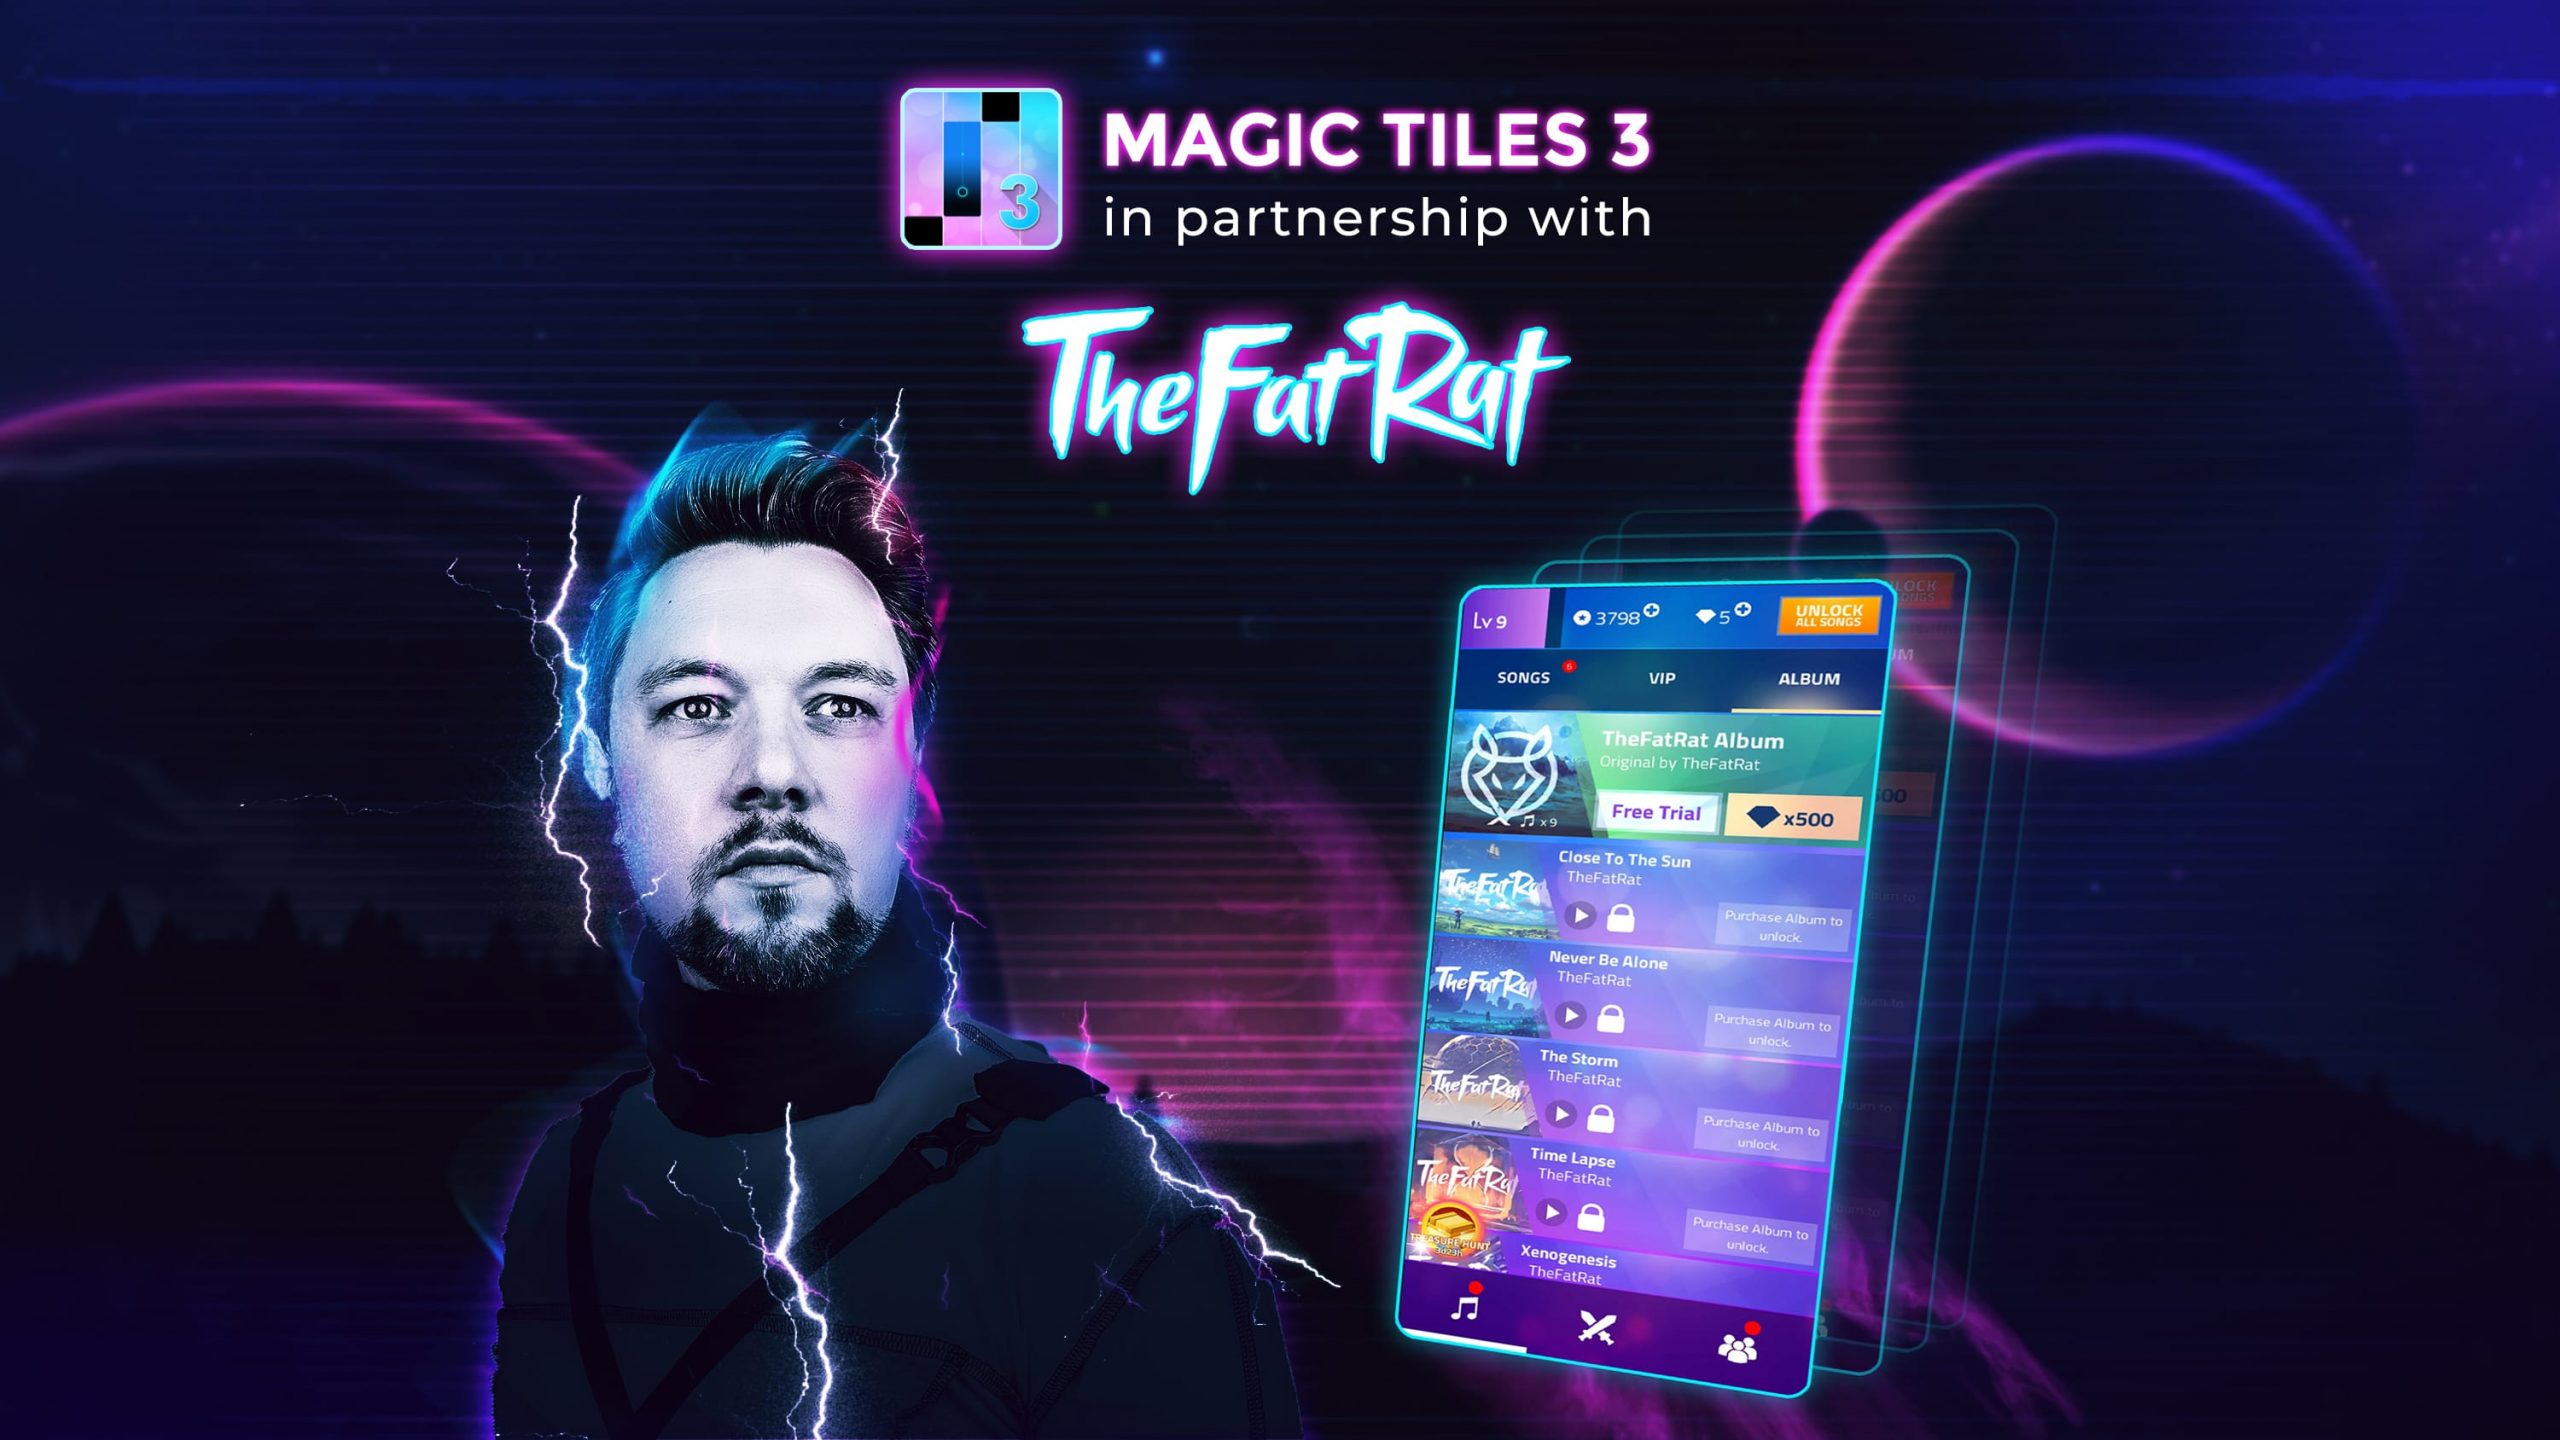 TheFatRat teams up with Amanotes to feature music in Magic Tiles 3 game